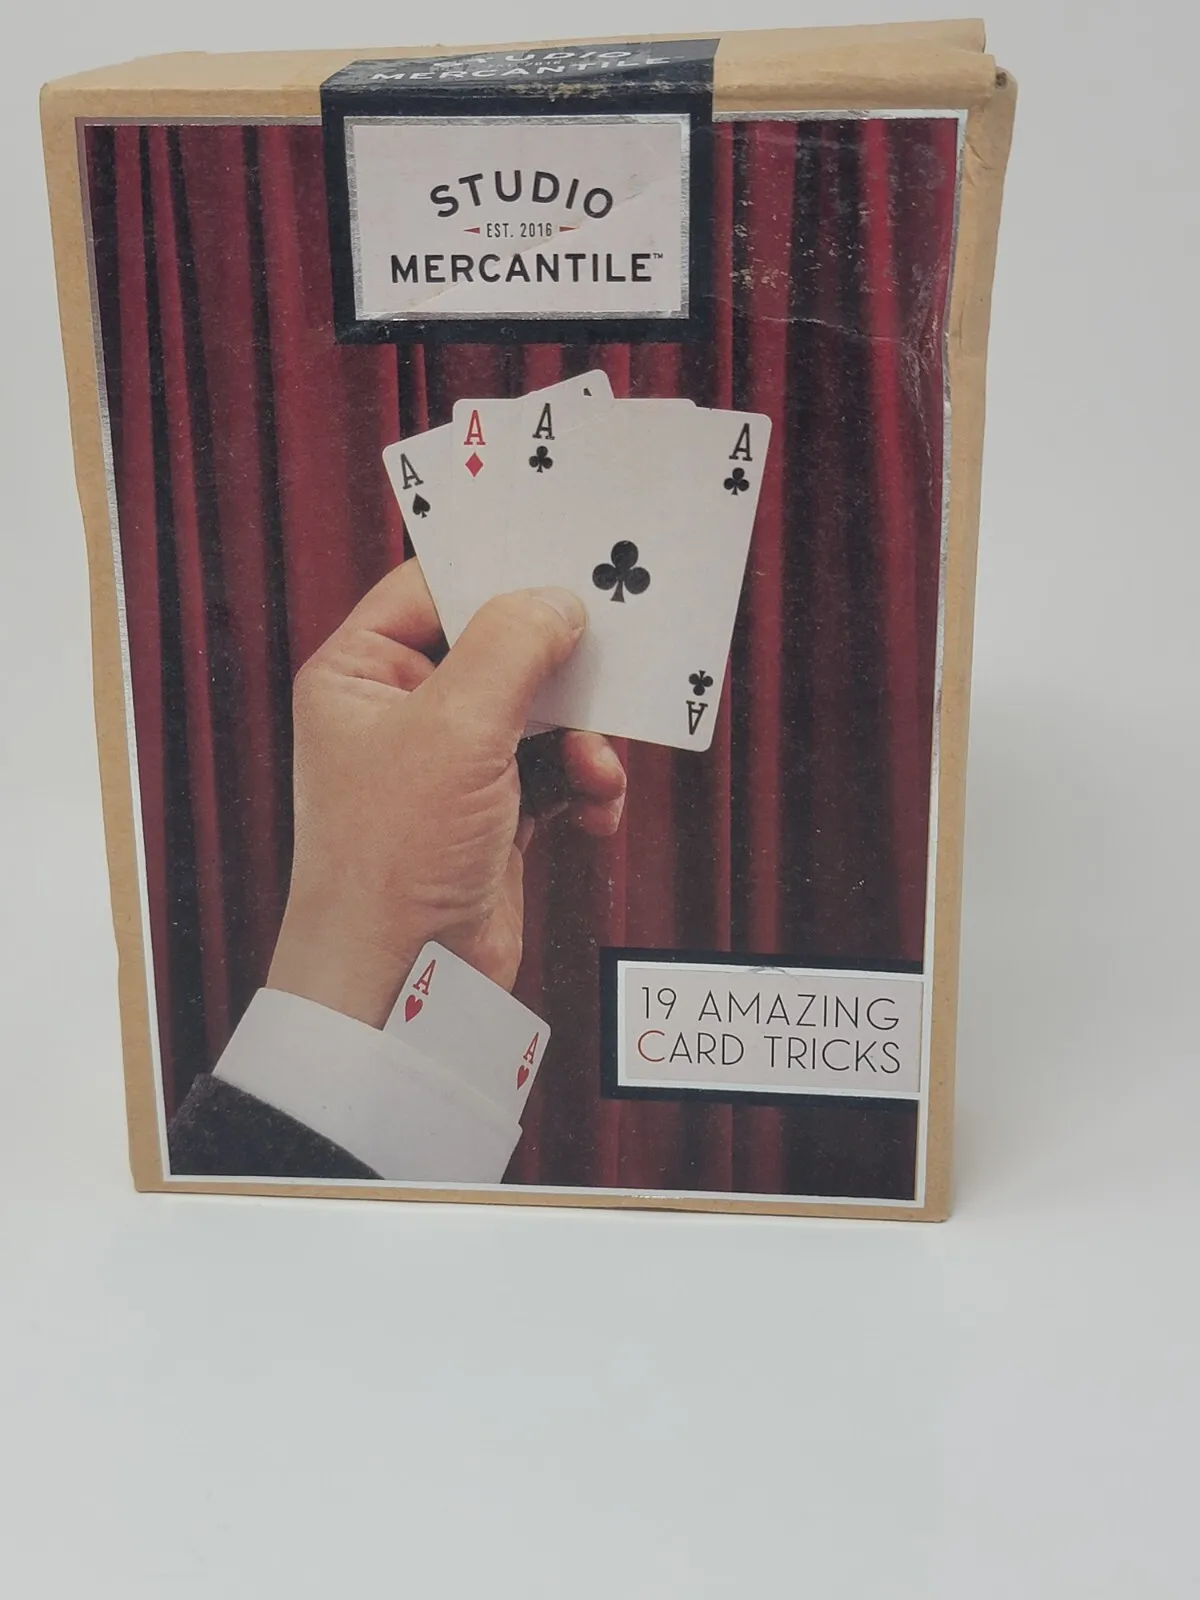 19 AMAZING CARD TRICKS Studio Mercantile Magician How-To Kit & Instructions